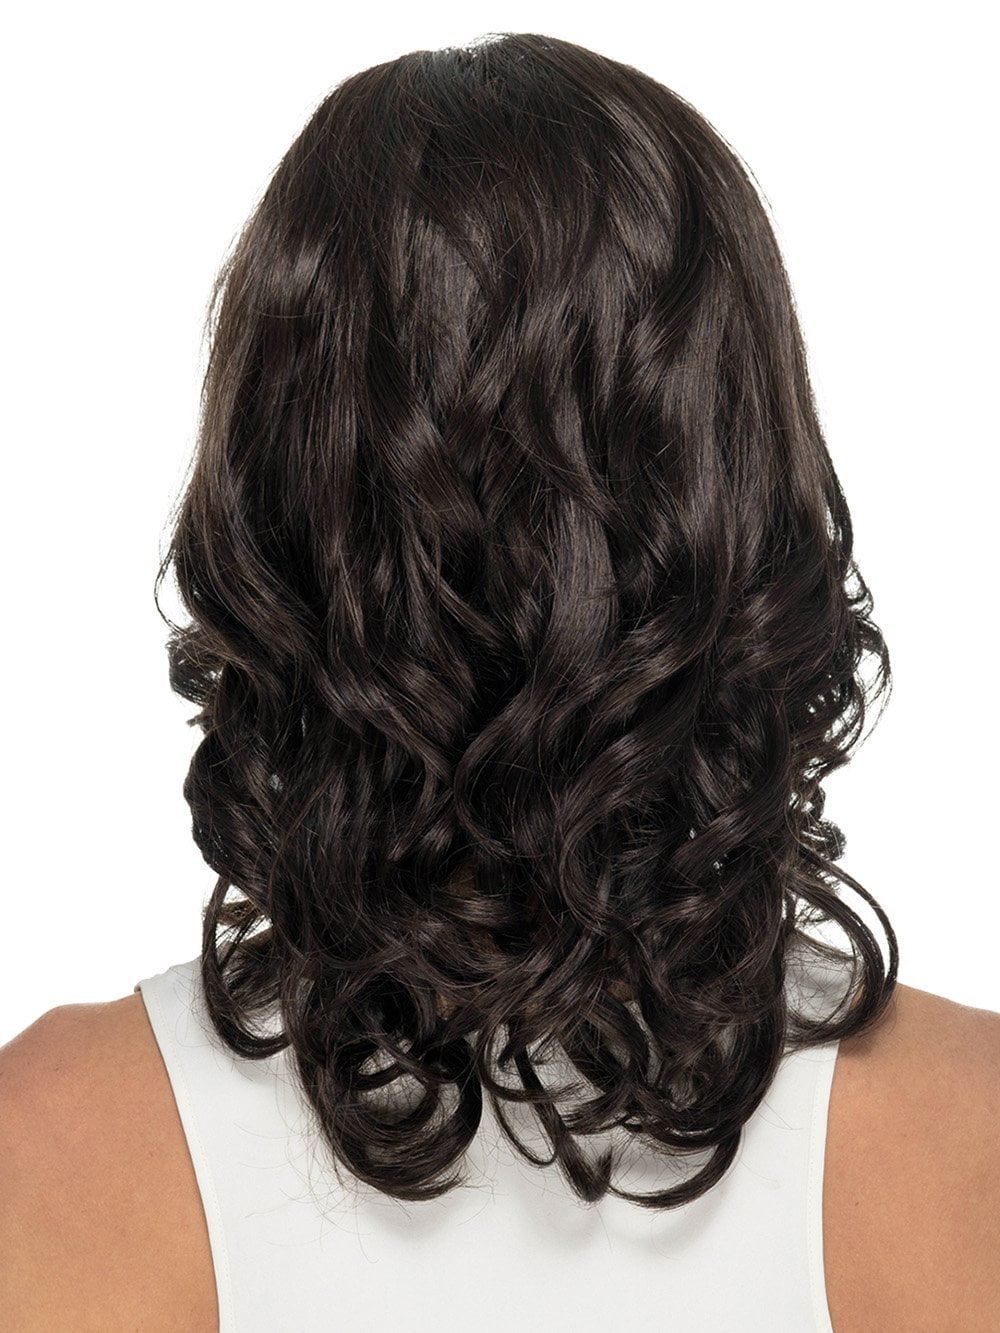 With a lace front and monofilament top, you can enjoy an airy, breathable fit that is the ultimate in comfort and beauty